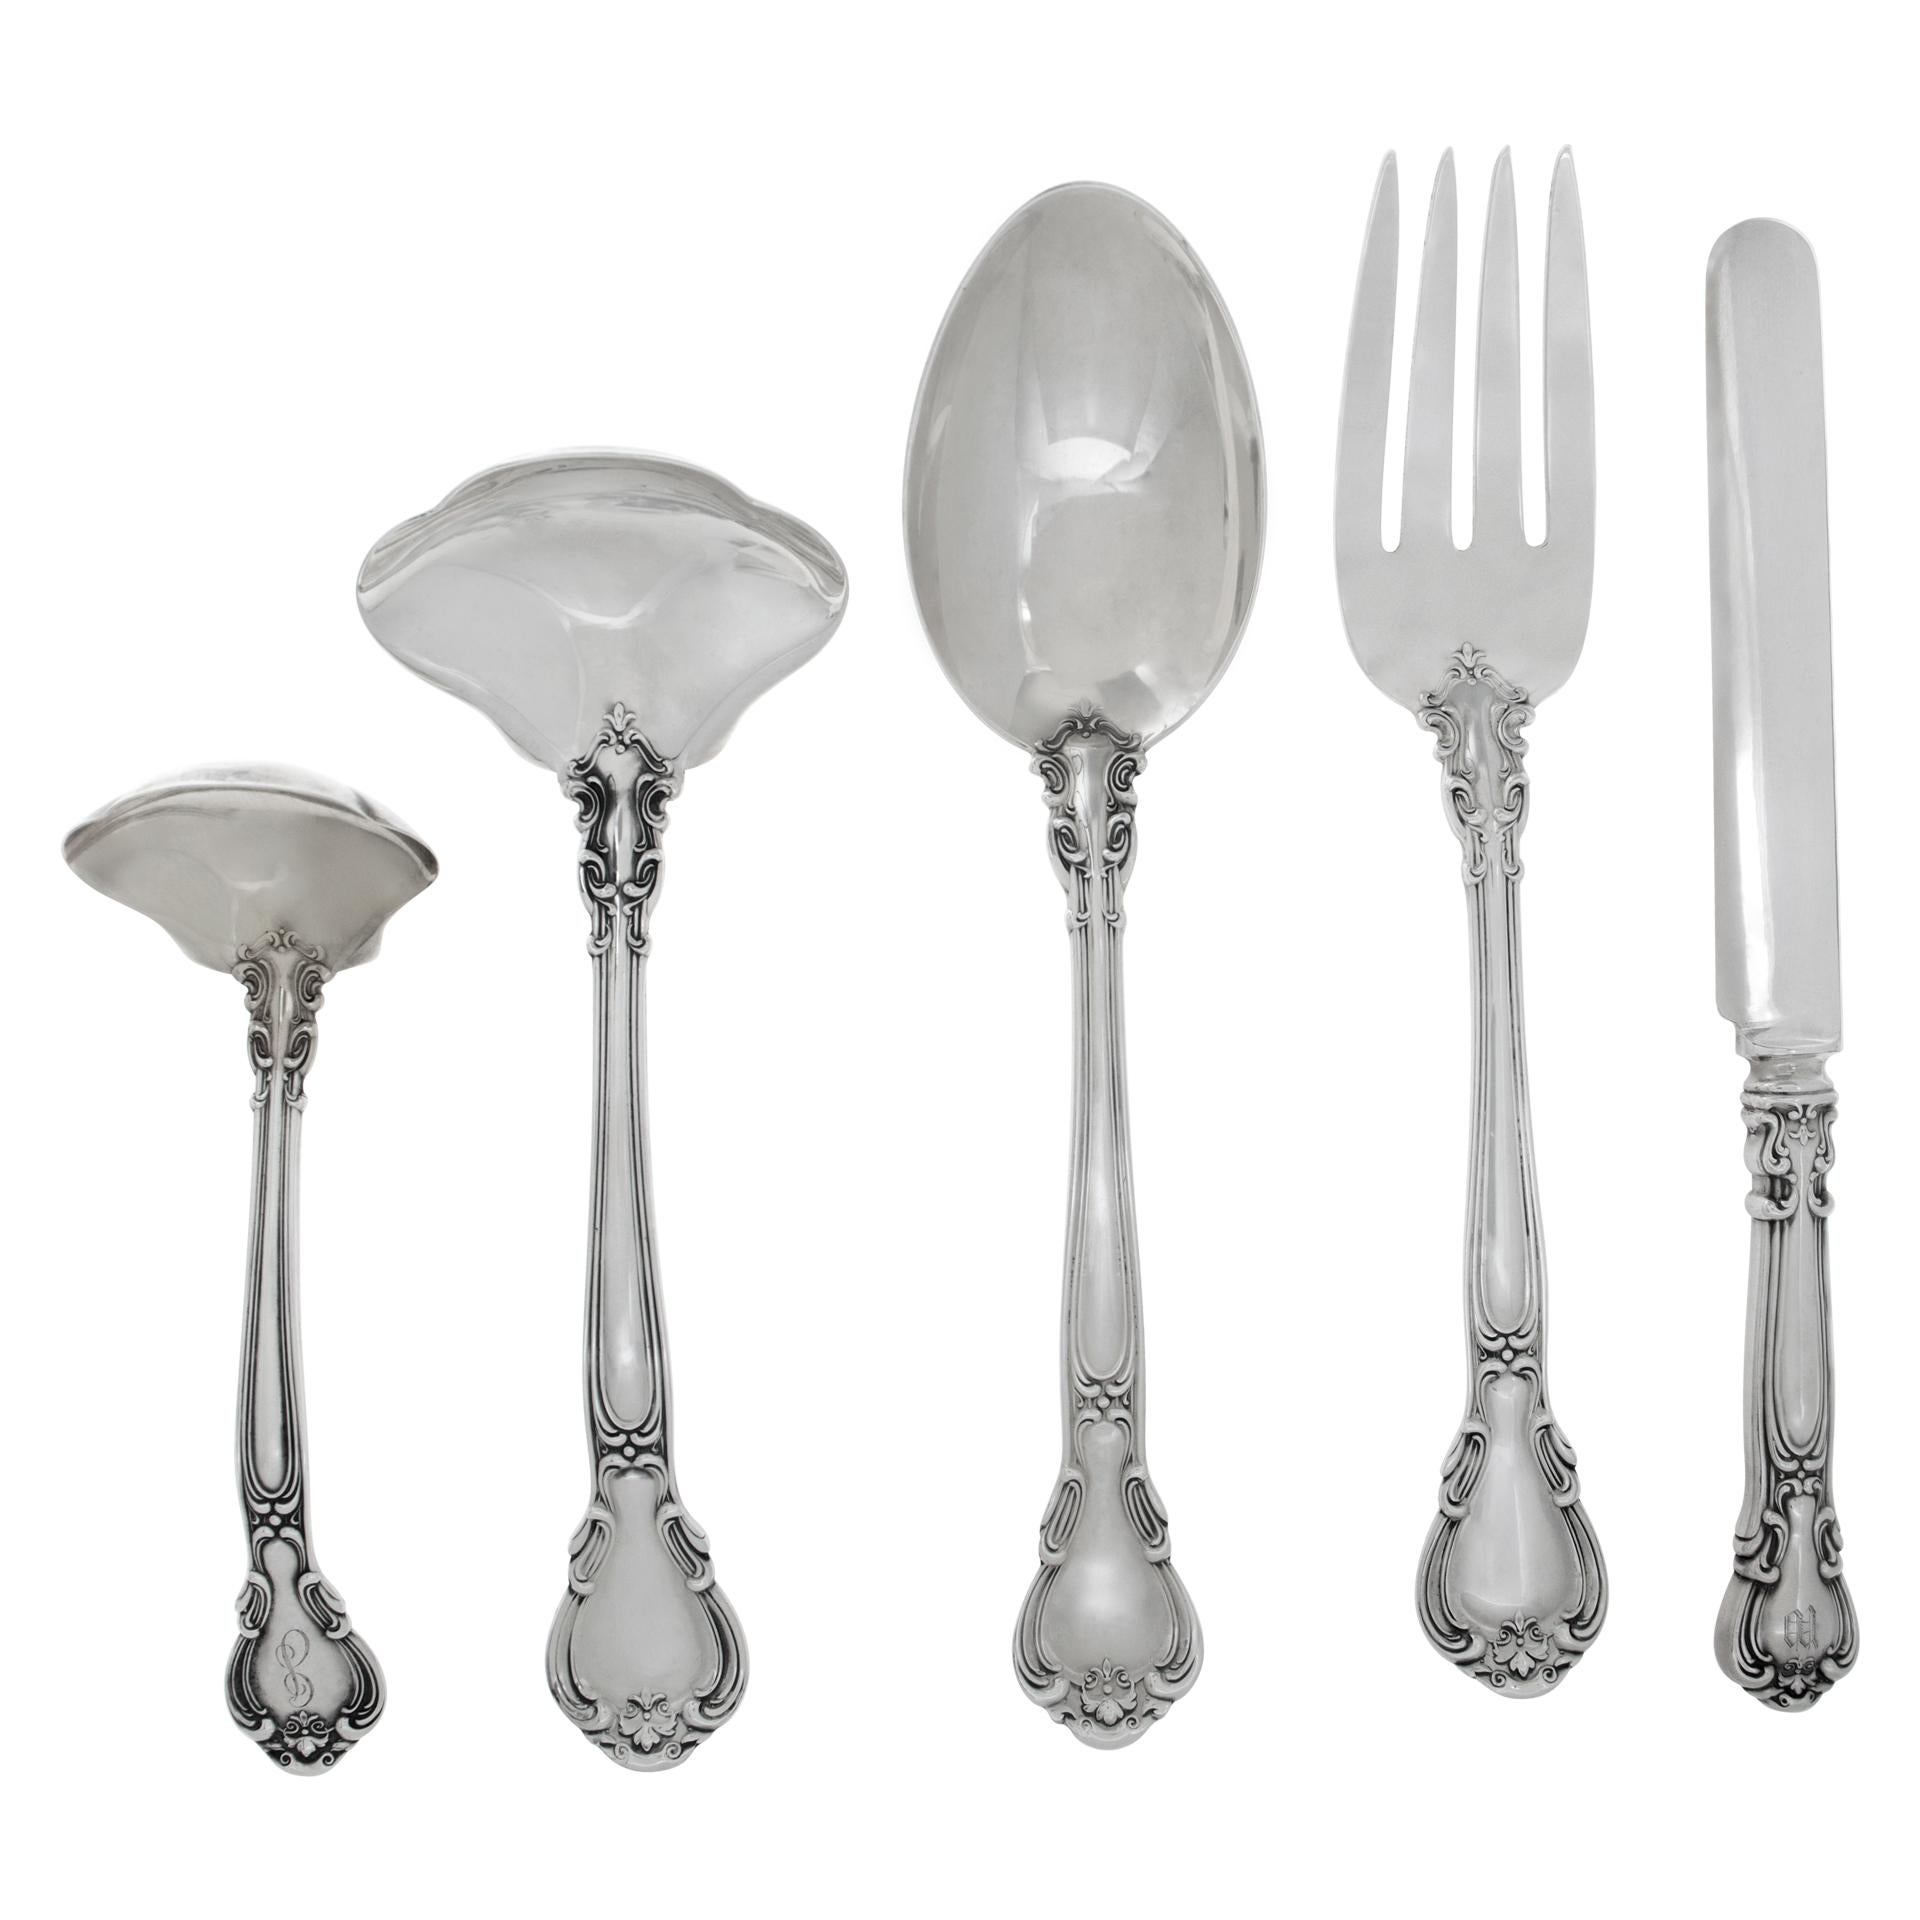 CHANTILLY sterling silver flatware set patented in 1895 by Gorham- TOTAL 100 PIECES- 7 Place Setting for 8 (with xtra, read description carefully) and 8 serving pieces. Over 127 troy ounces of .925 sterling silver (counting all stainless steel blade